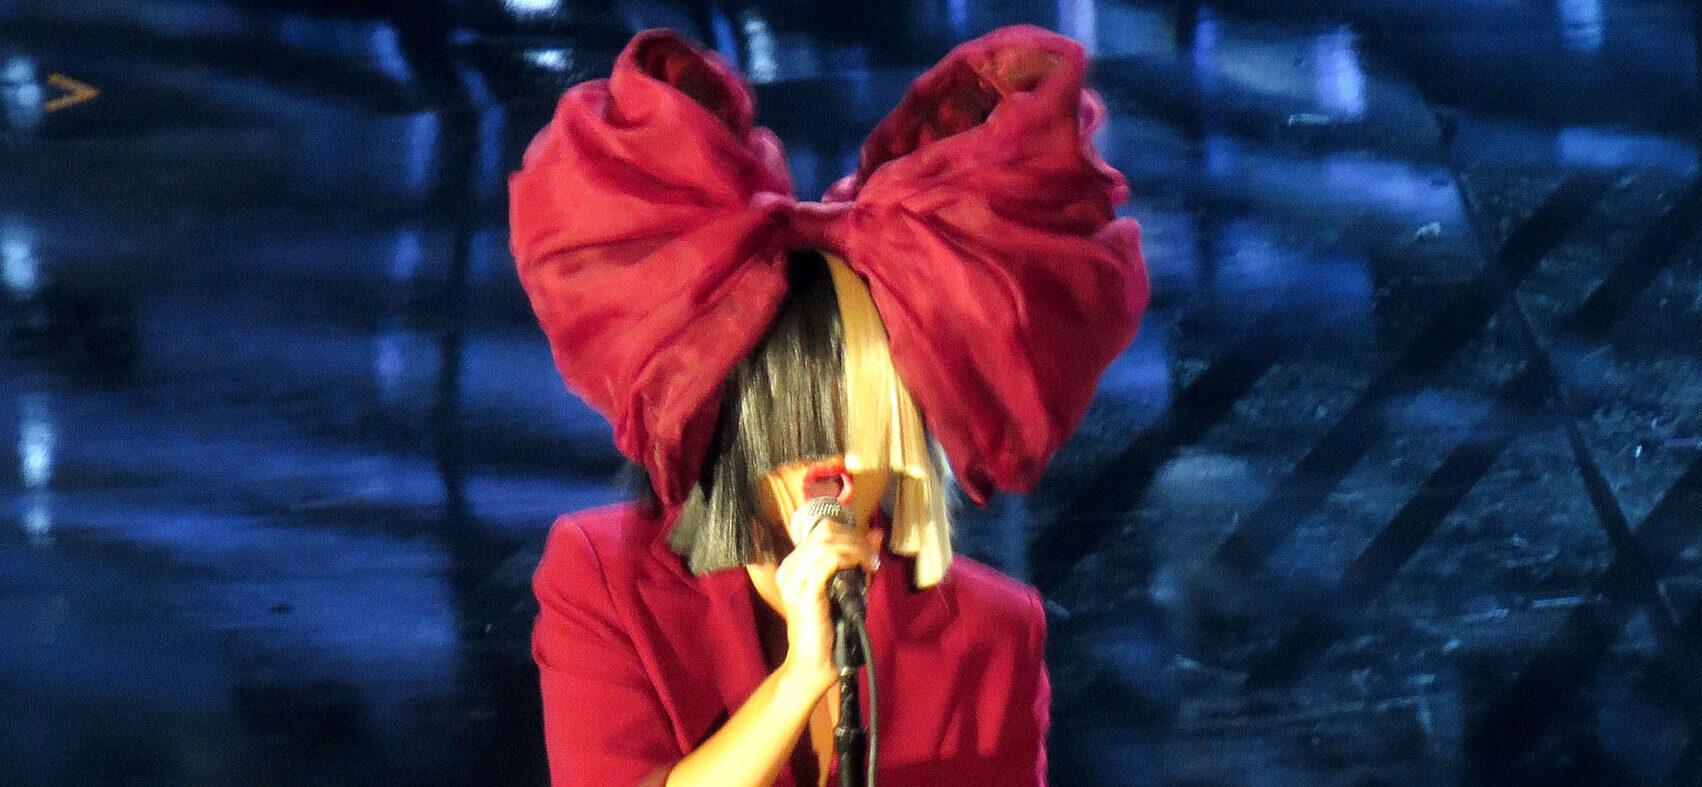 Sia Reveals Neurological Disorder That Unknowingly Played A Huge Role In Her Life